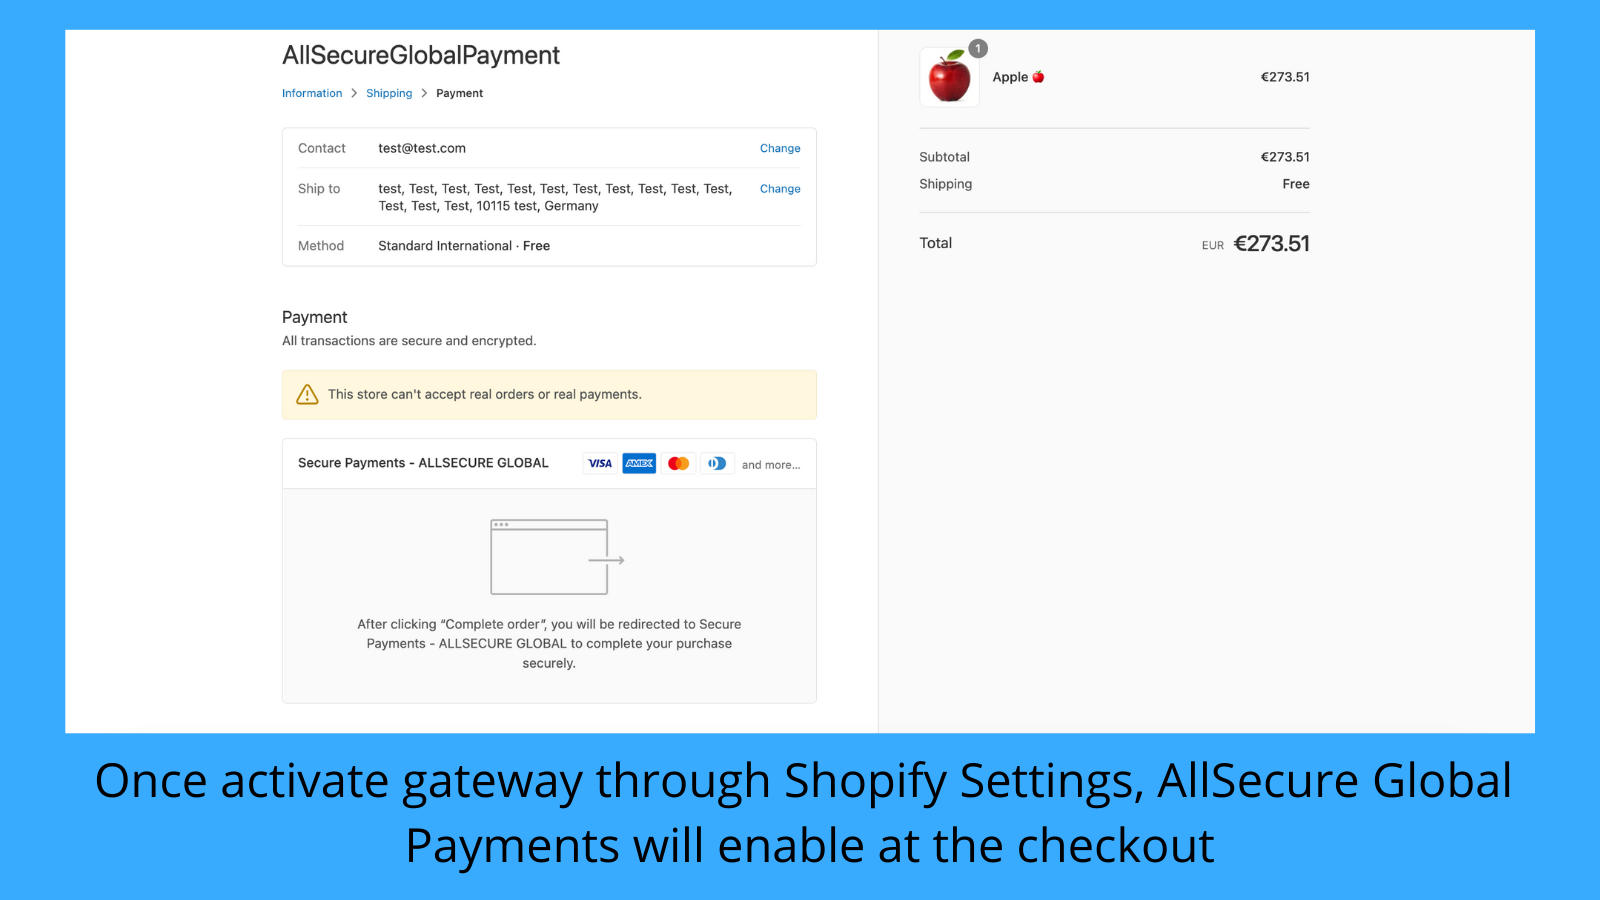 Enable AllSecure Global Payments at the checkout